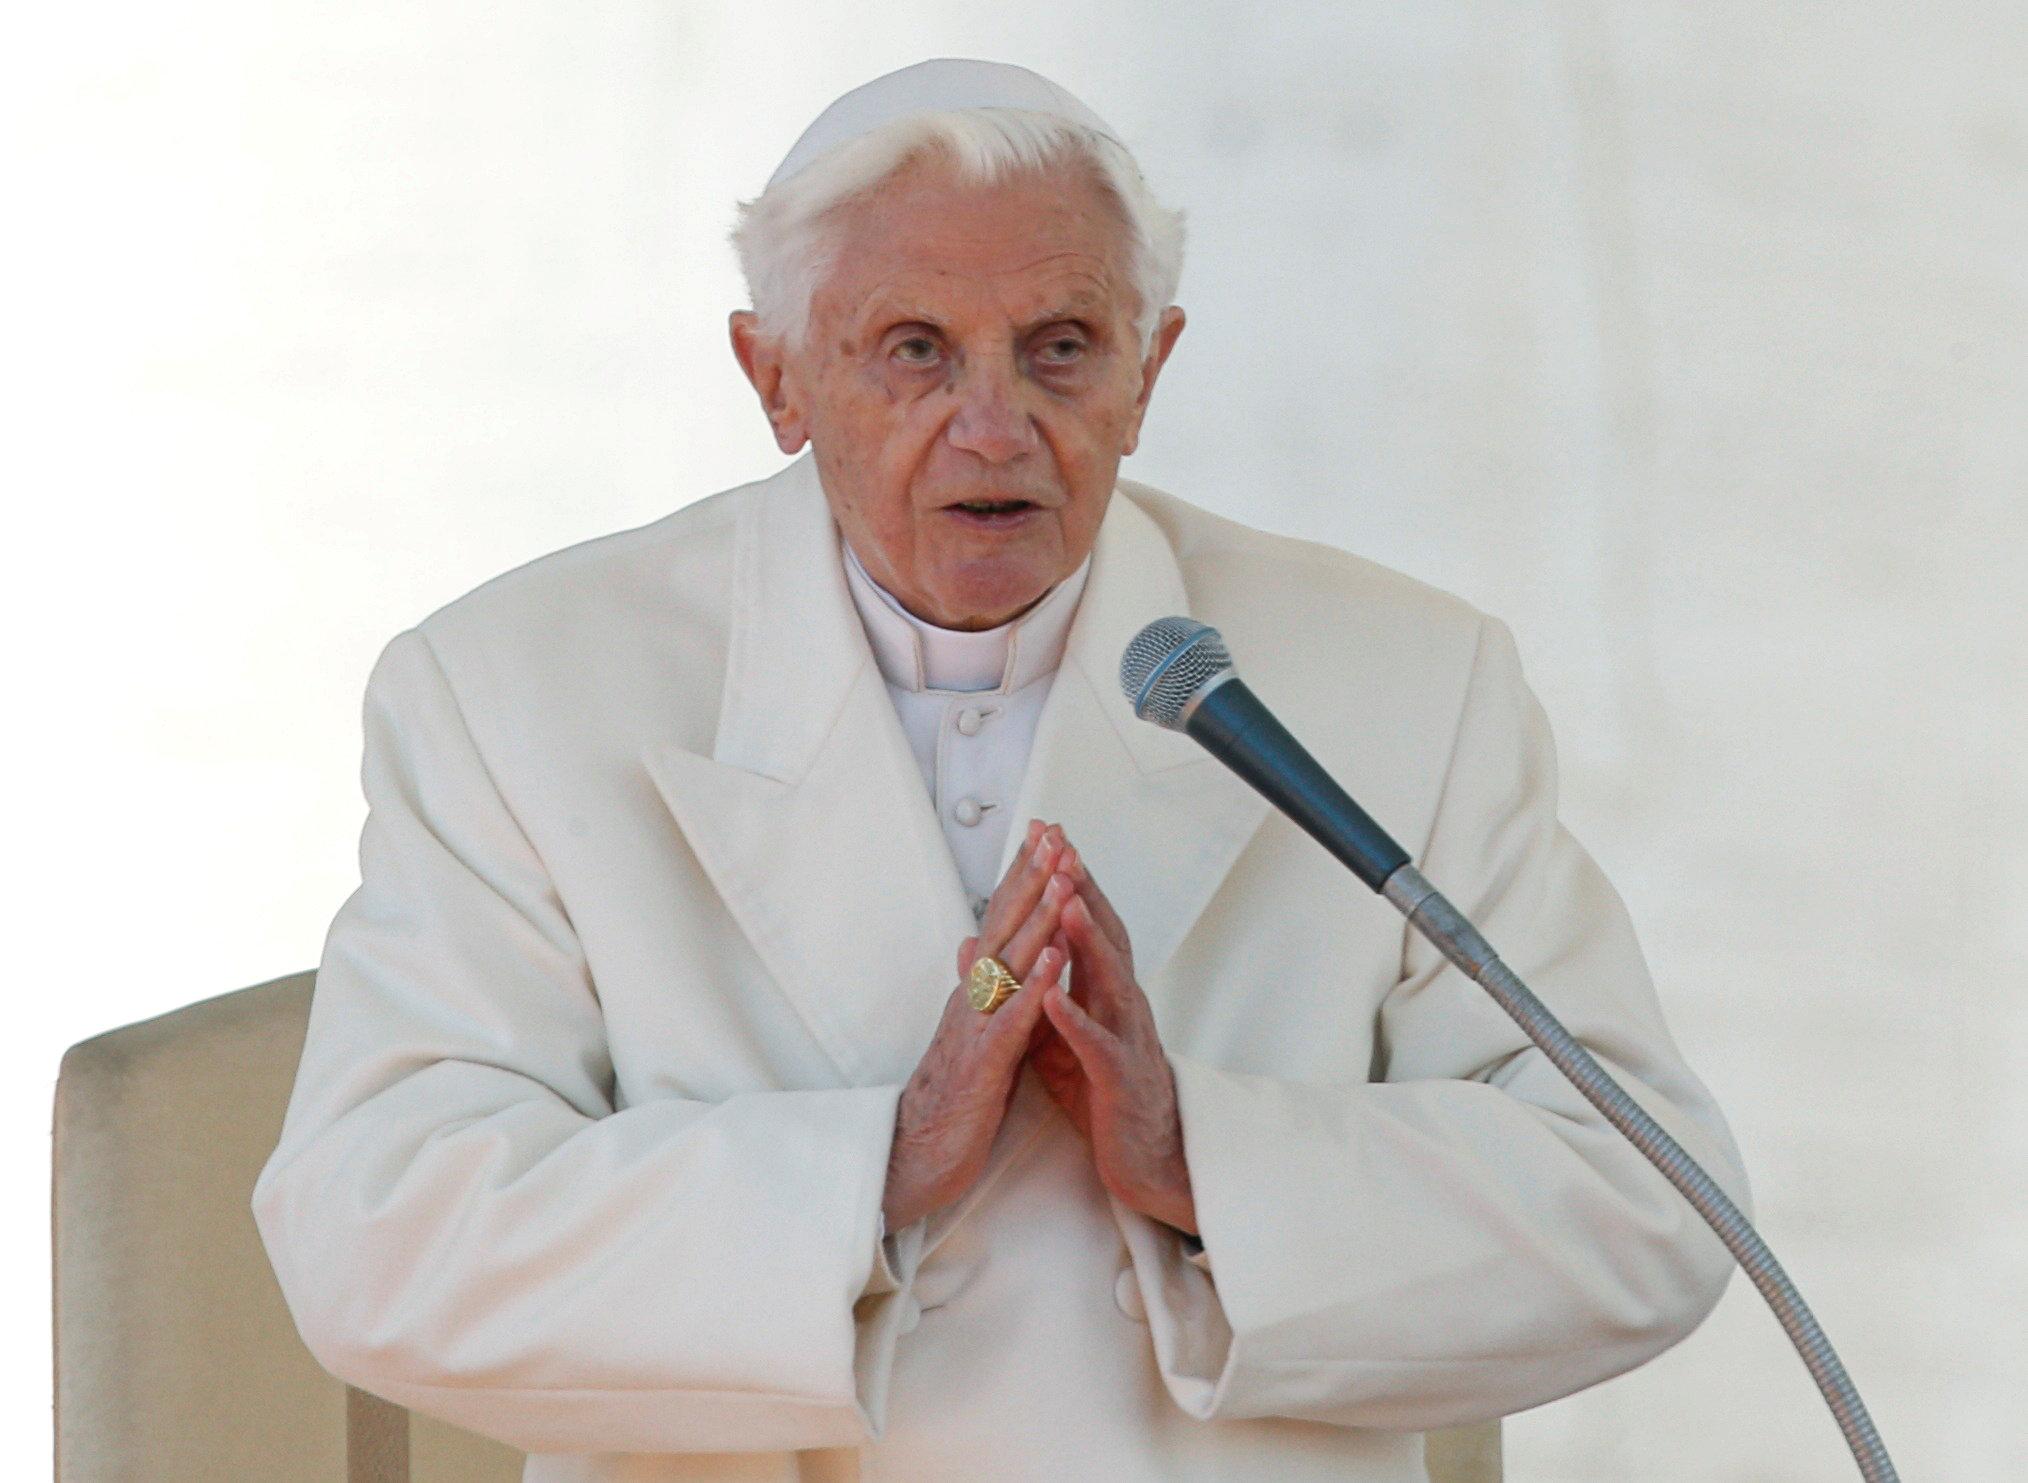 Pope benedict wearing a white church outfit and giving a speech on mic